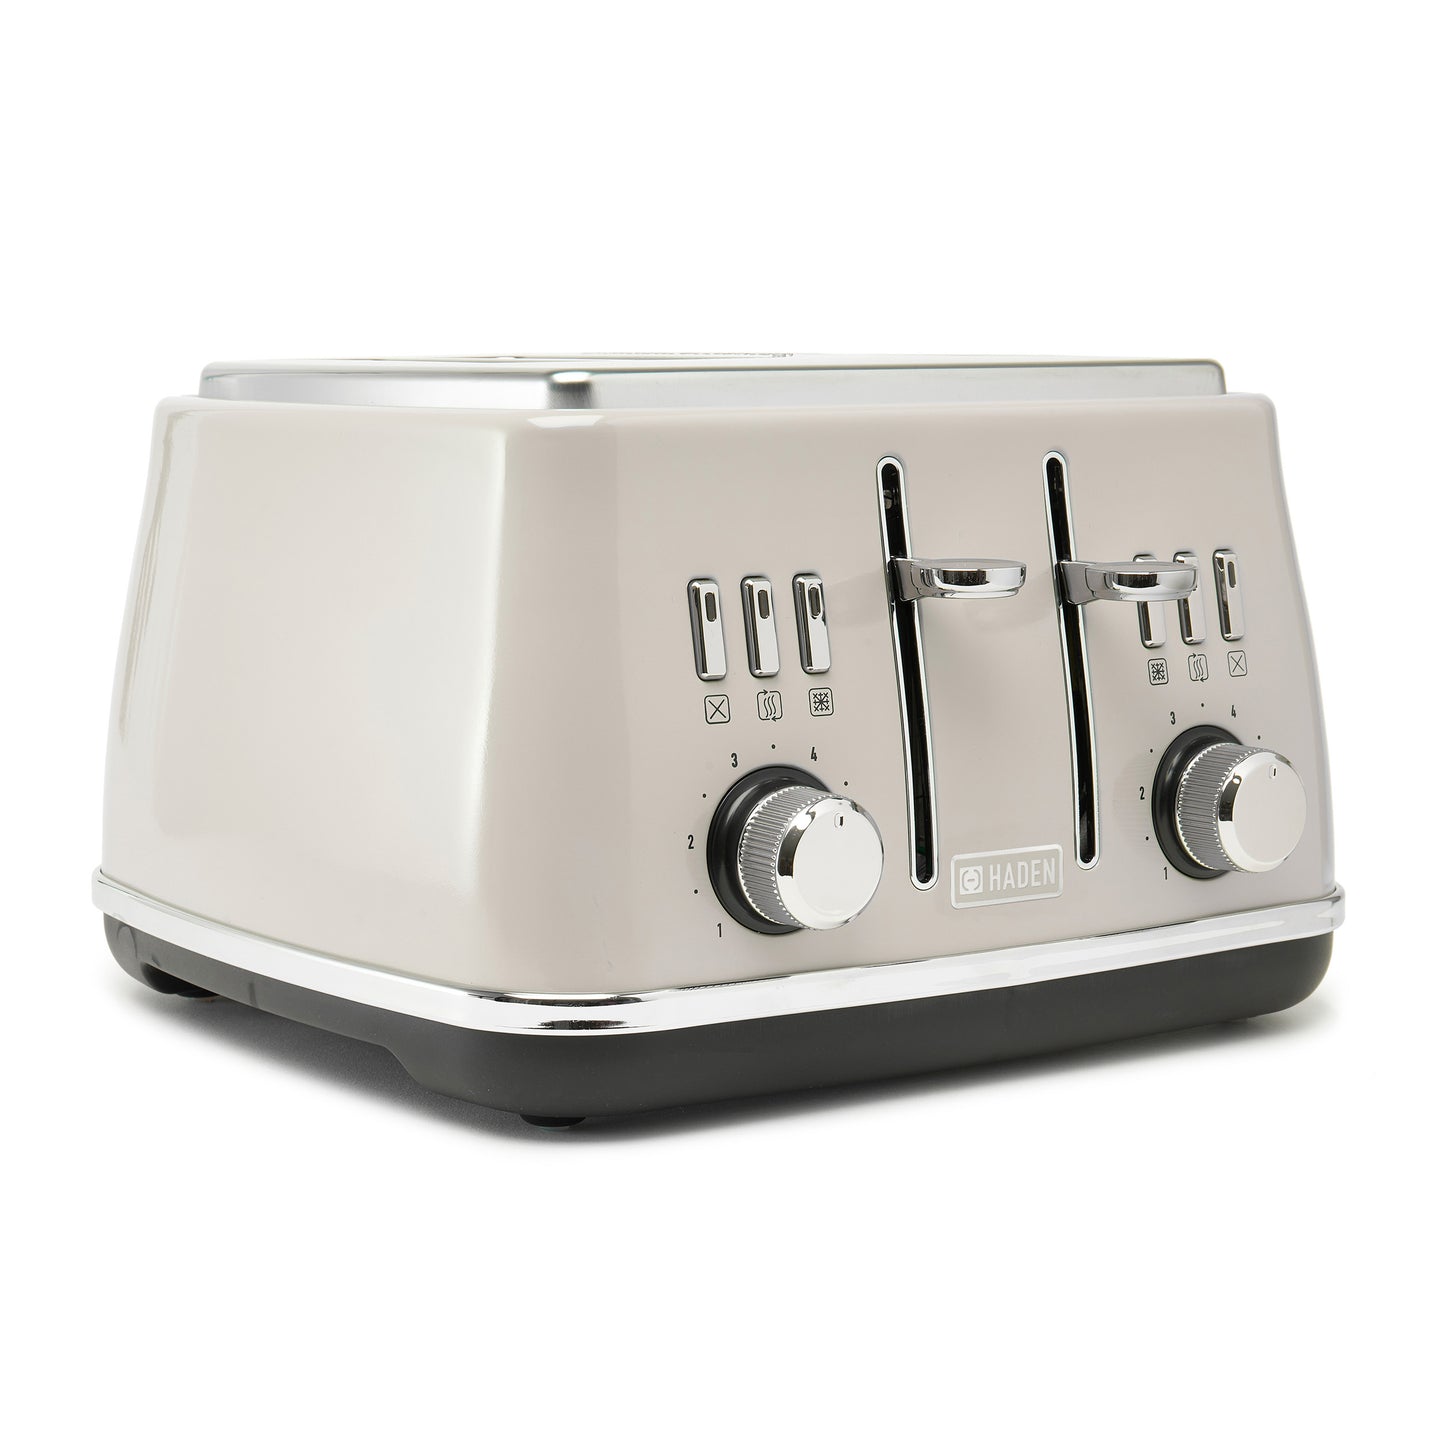 Haden Cotswold 4 Slice Putty Toaster